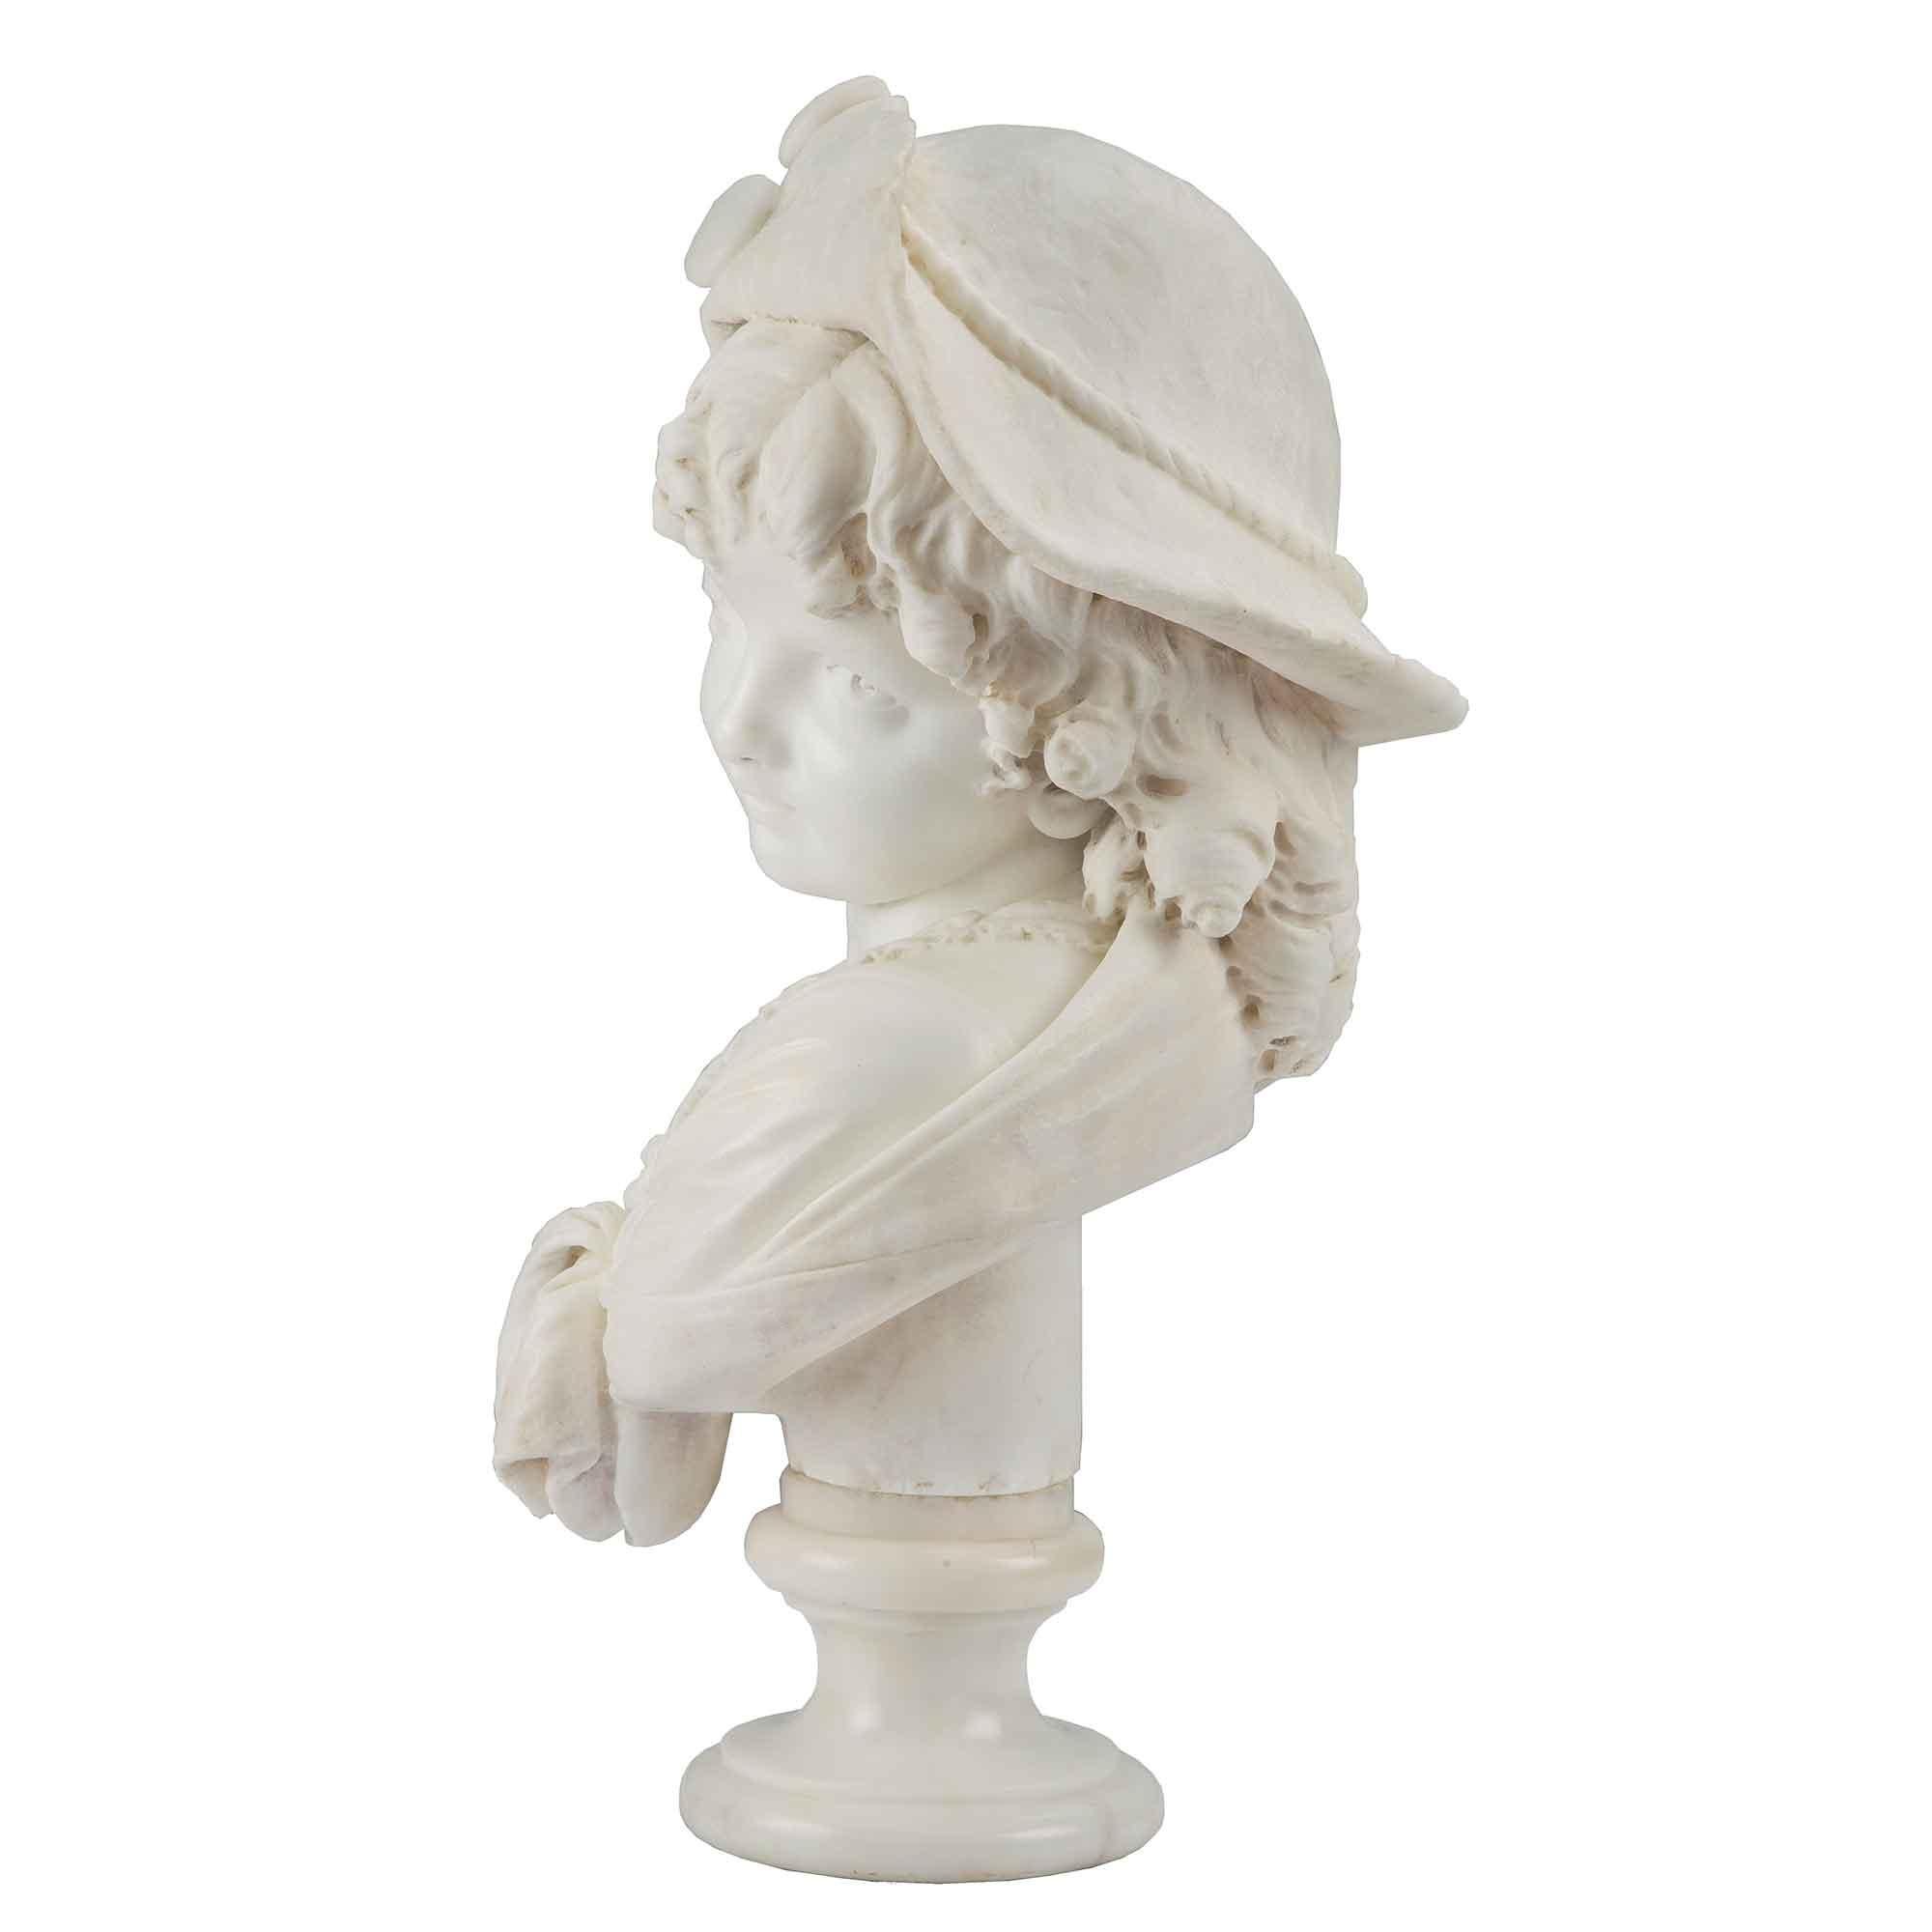 A very charming French 19th century signed white Carrara marble bust of a stylish young girl. Raised on a circular socle she is in classical dress with a shawl around her shoulders. With an adorable expression and lovely ringlets, accented with an